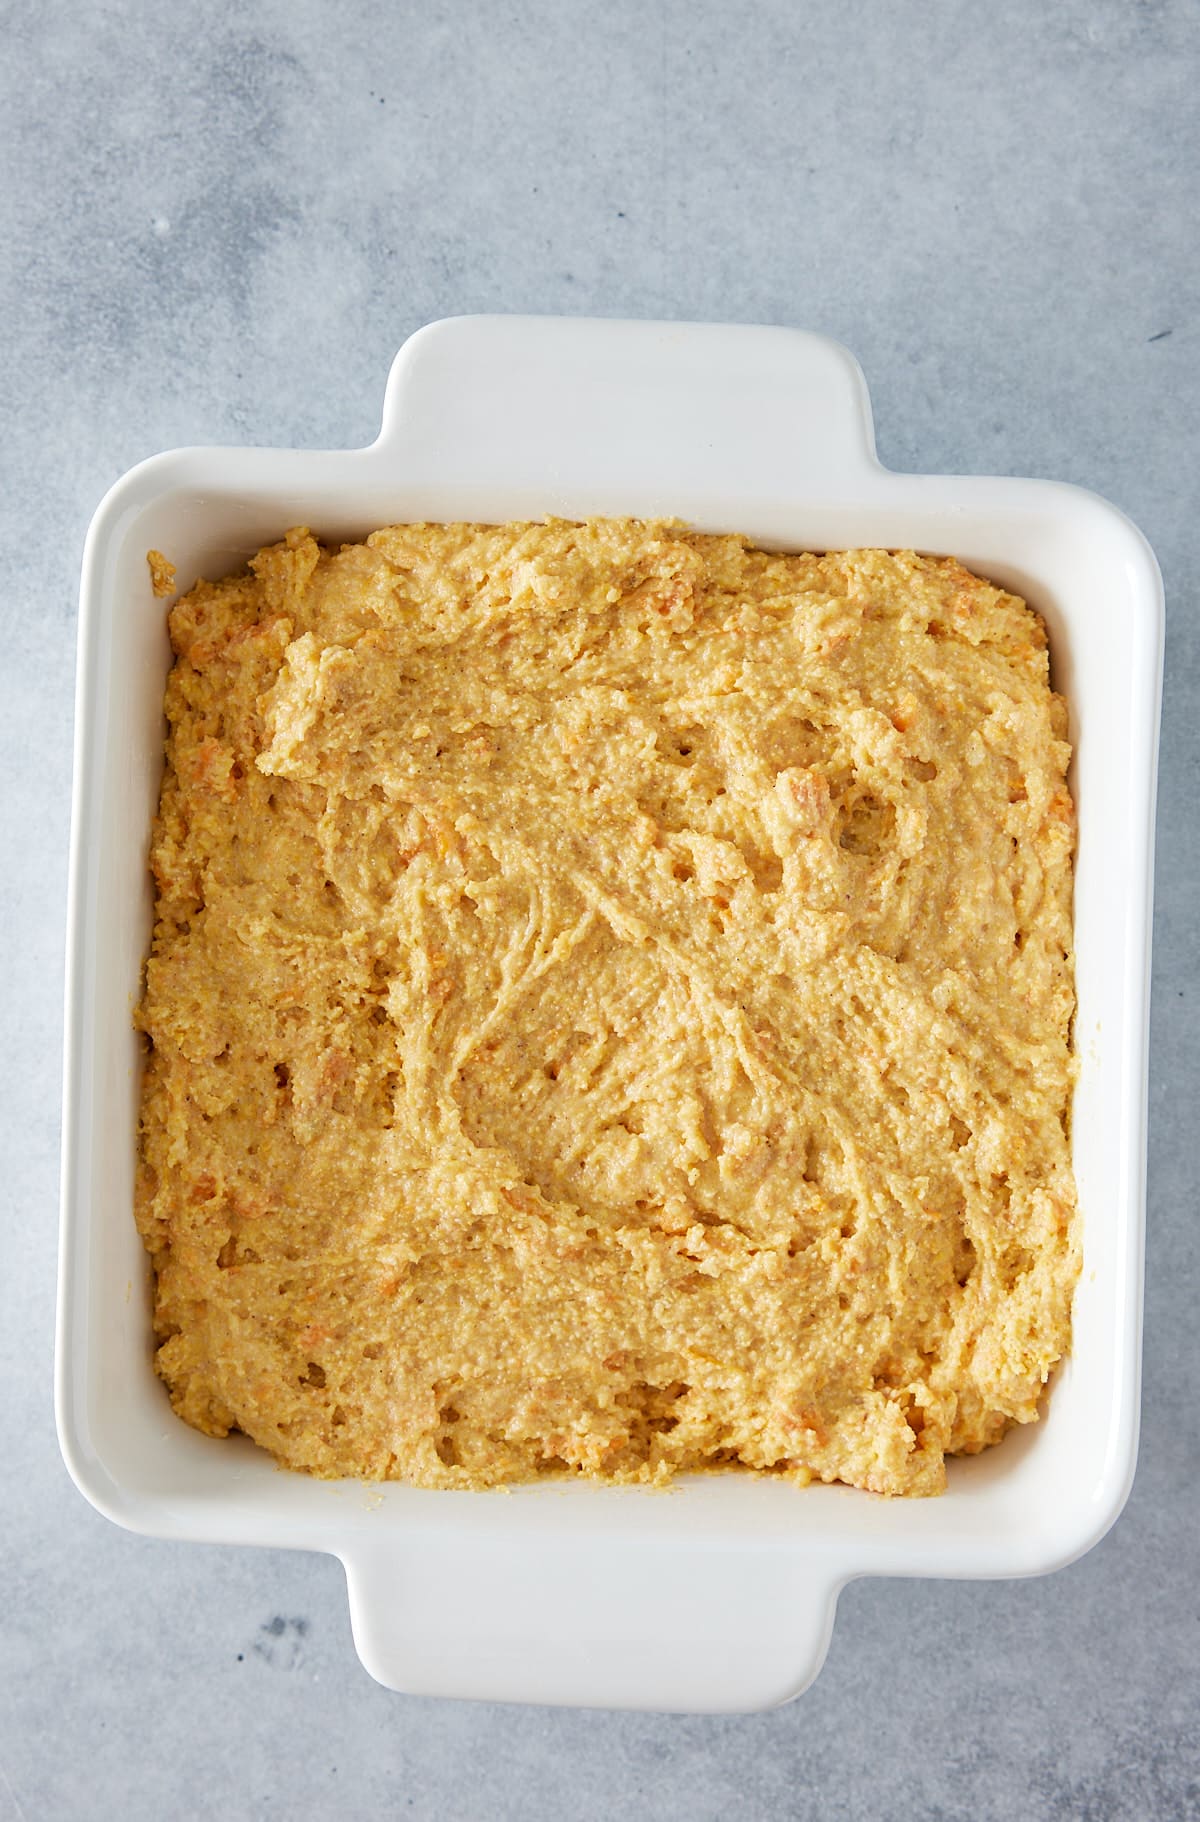 White square oven proof dish filled with cornbread batter